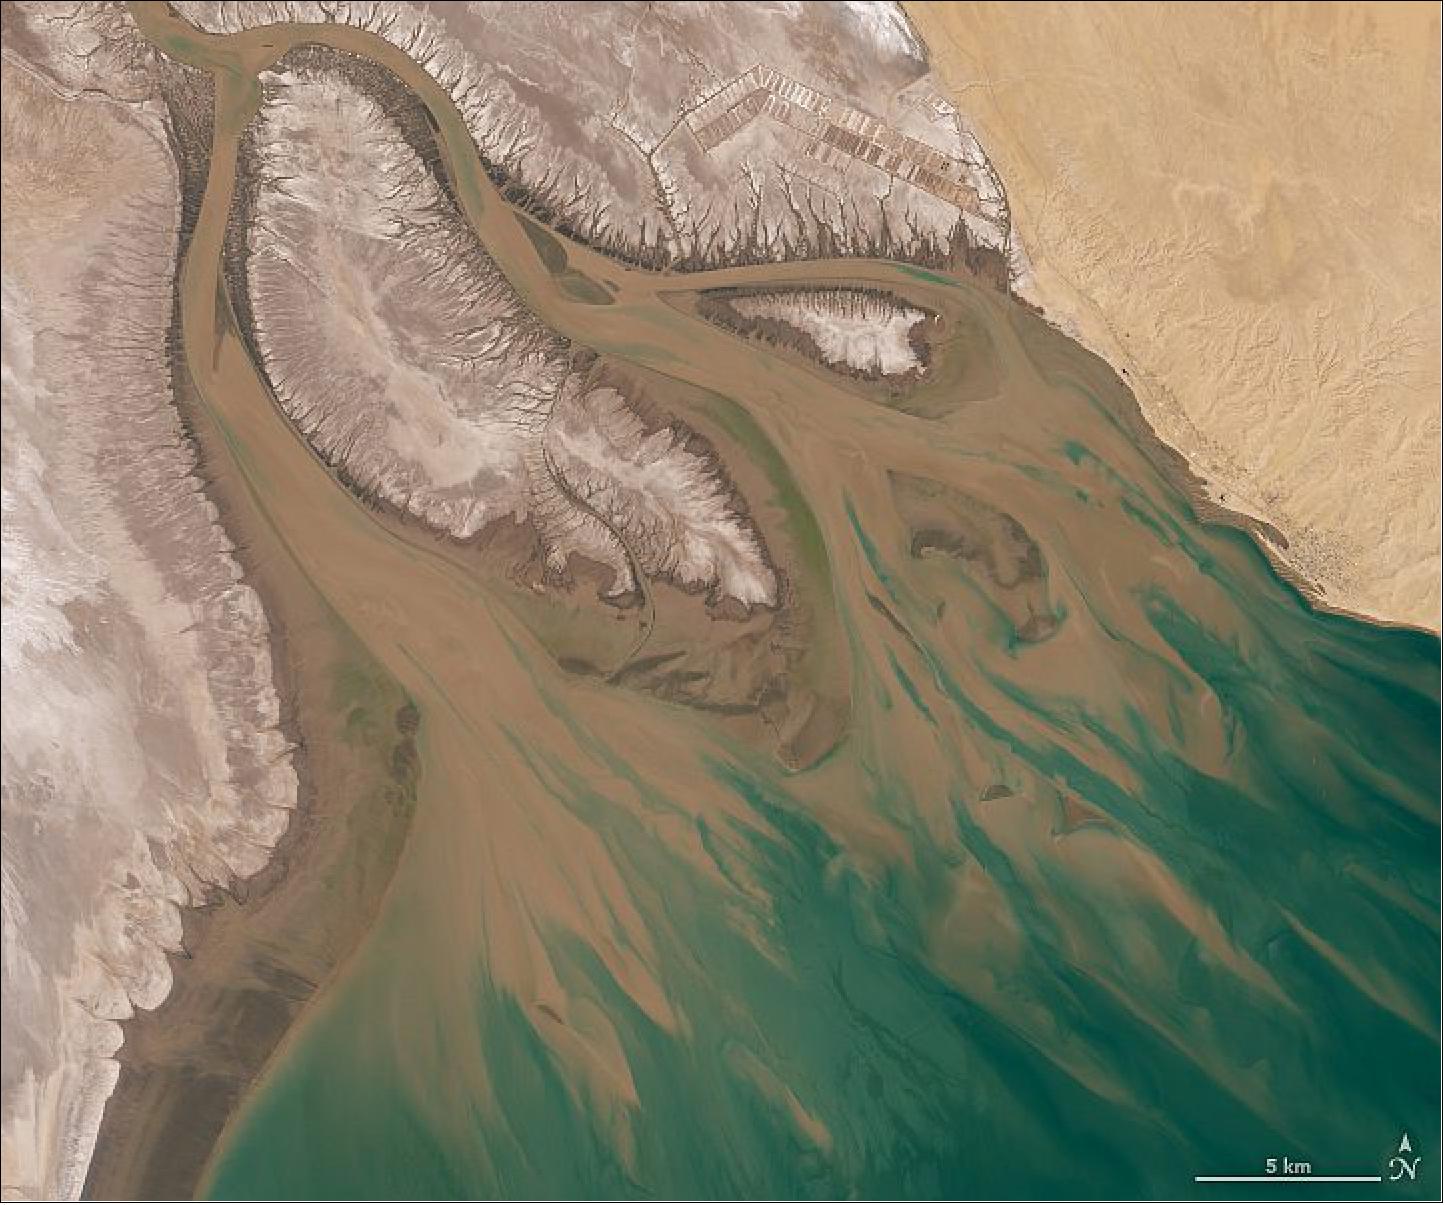 Figure 73: Detail image of Colorado River Delta emptying into the Gulf of California, also known as the Sea of Cortez (image credit: NASA Earth Observatory)